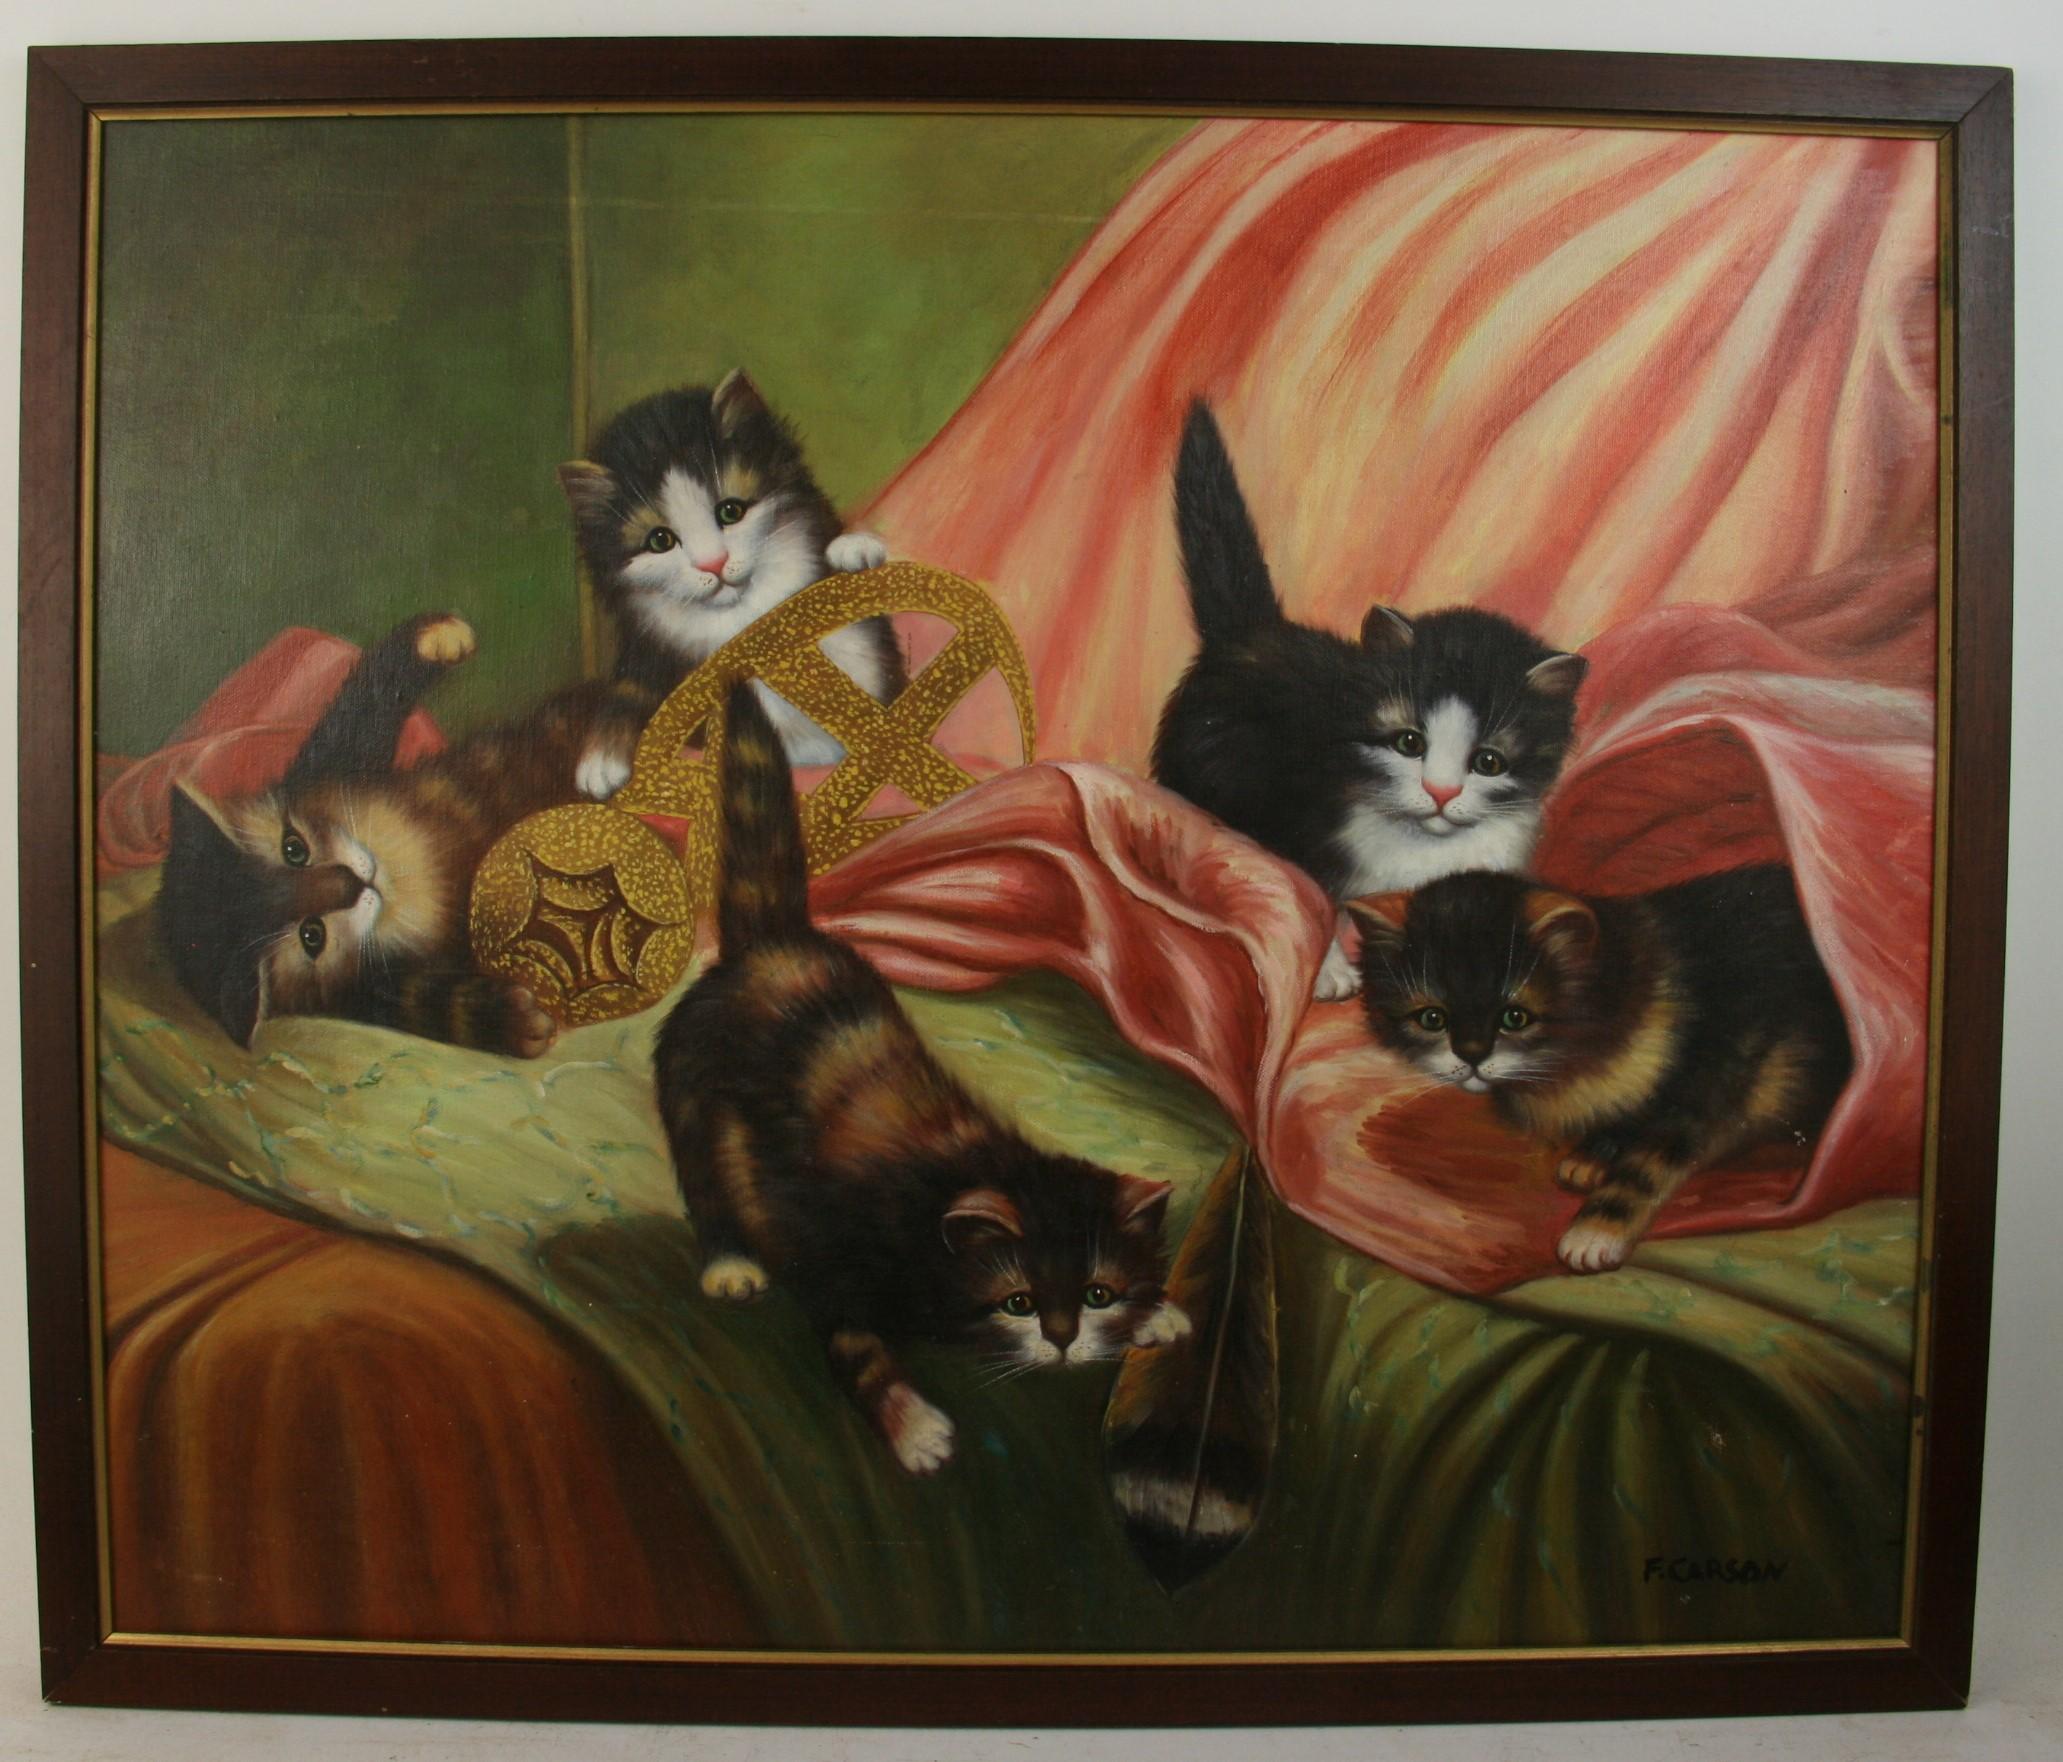 3745 Oil on canvas board of a litter of kittens frolicking on a sofa
Set in a black woof frame
Signed F. Carson